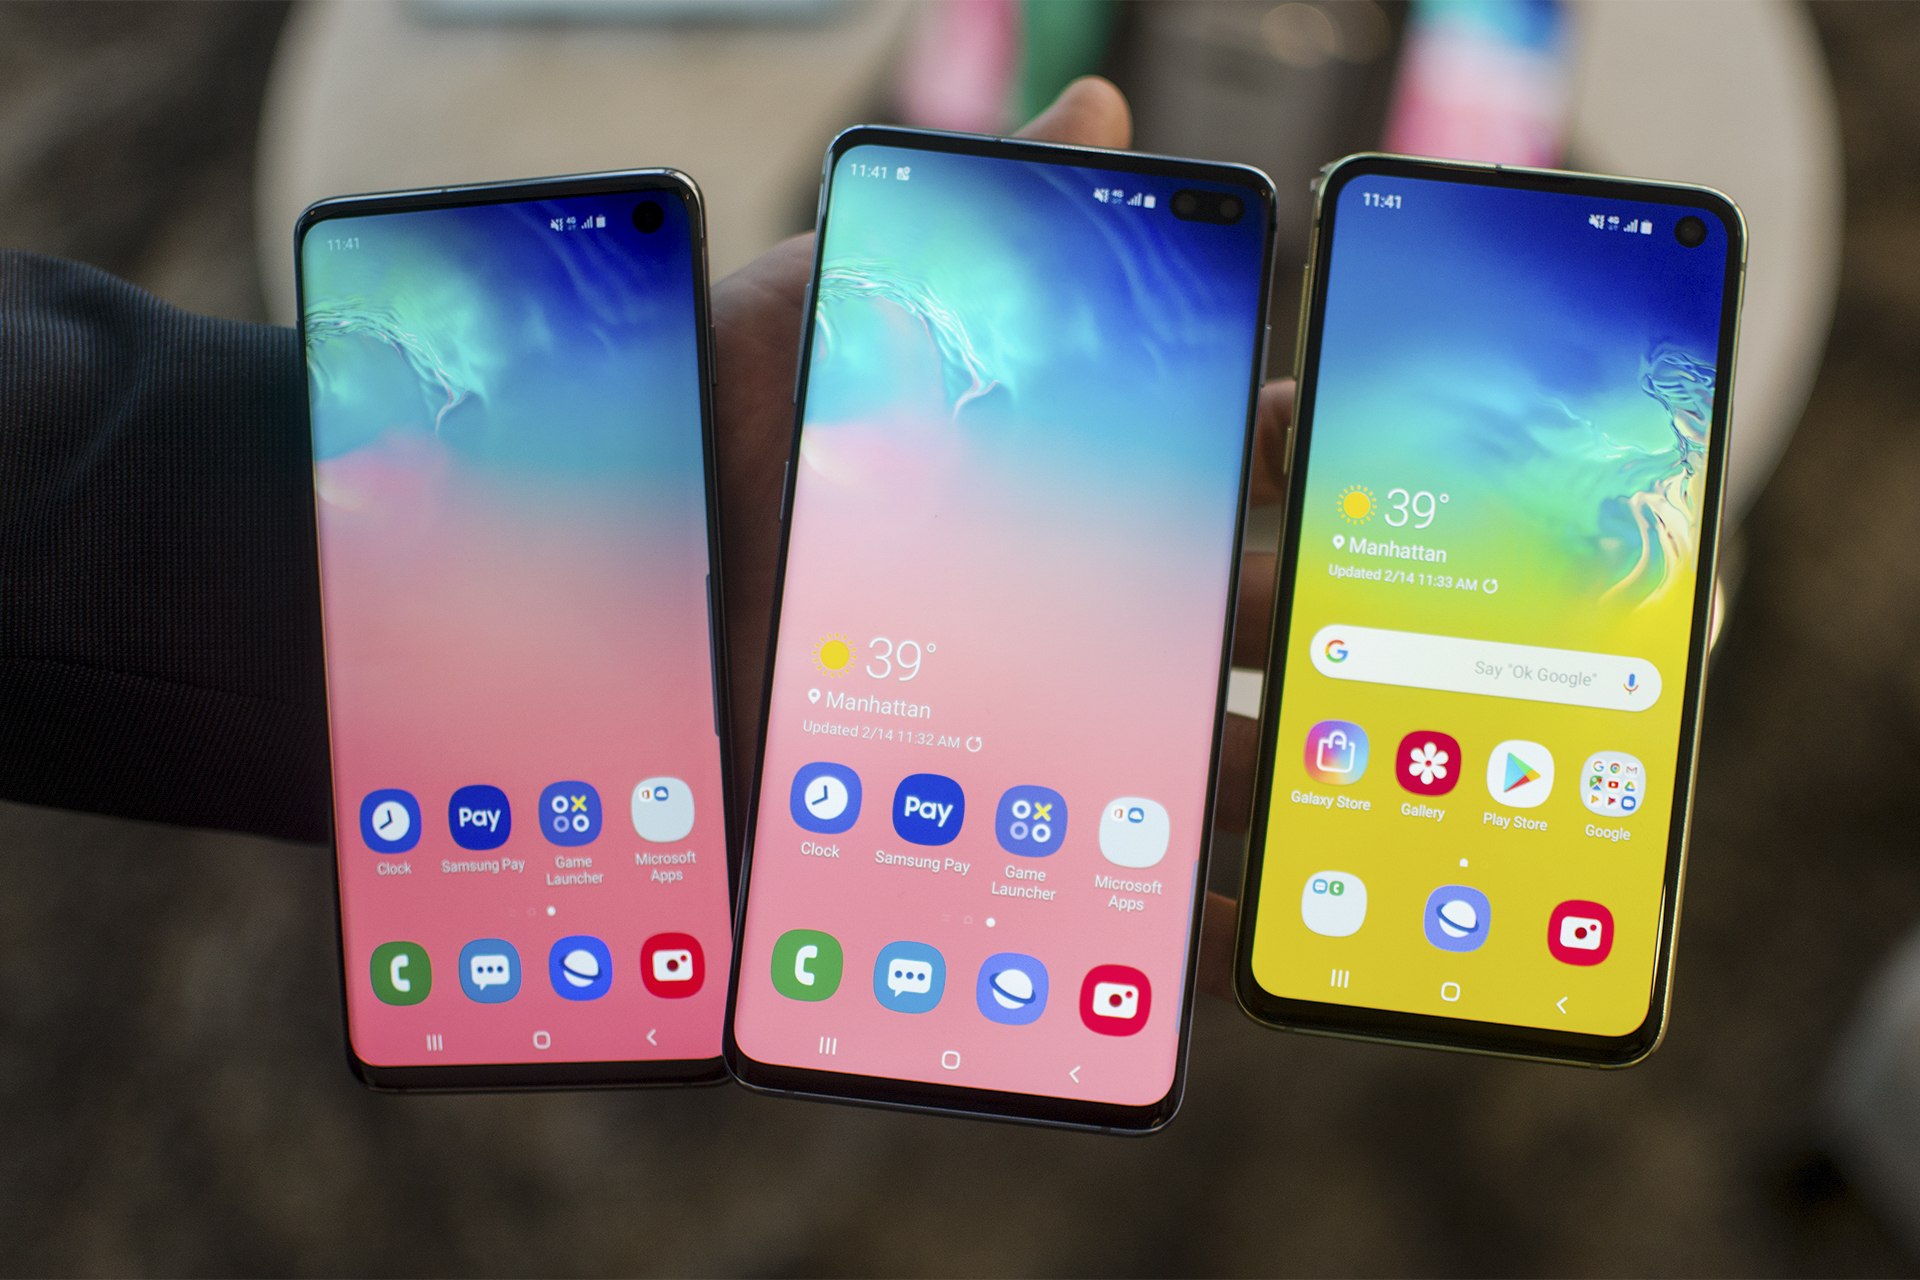 Video] Hands-On: Get to Know the Galaxy S10 – Samsung Global Newsroom